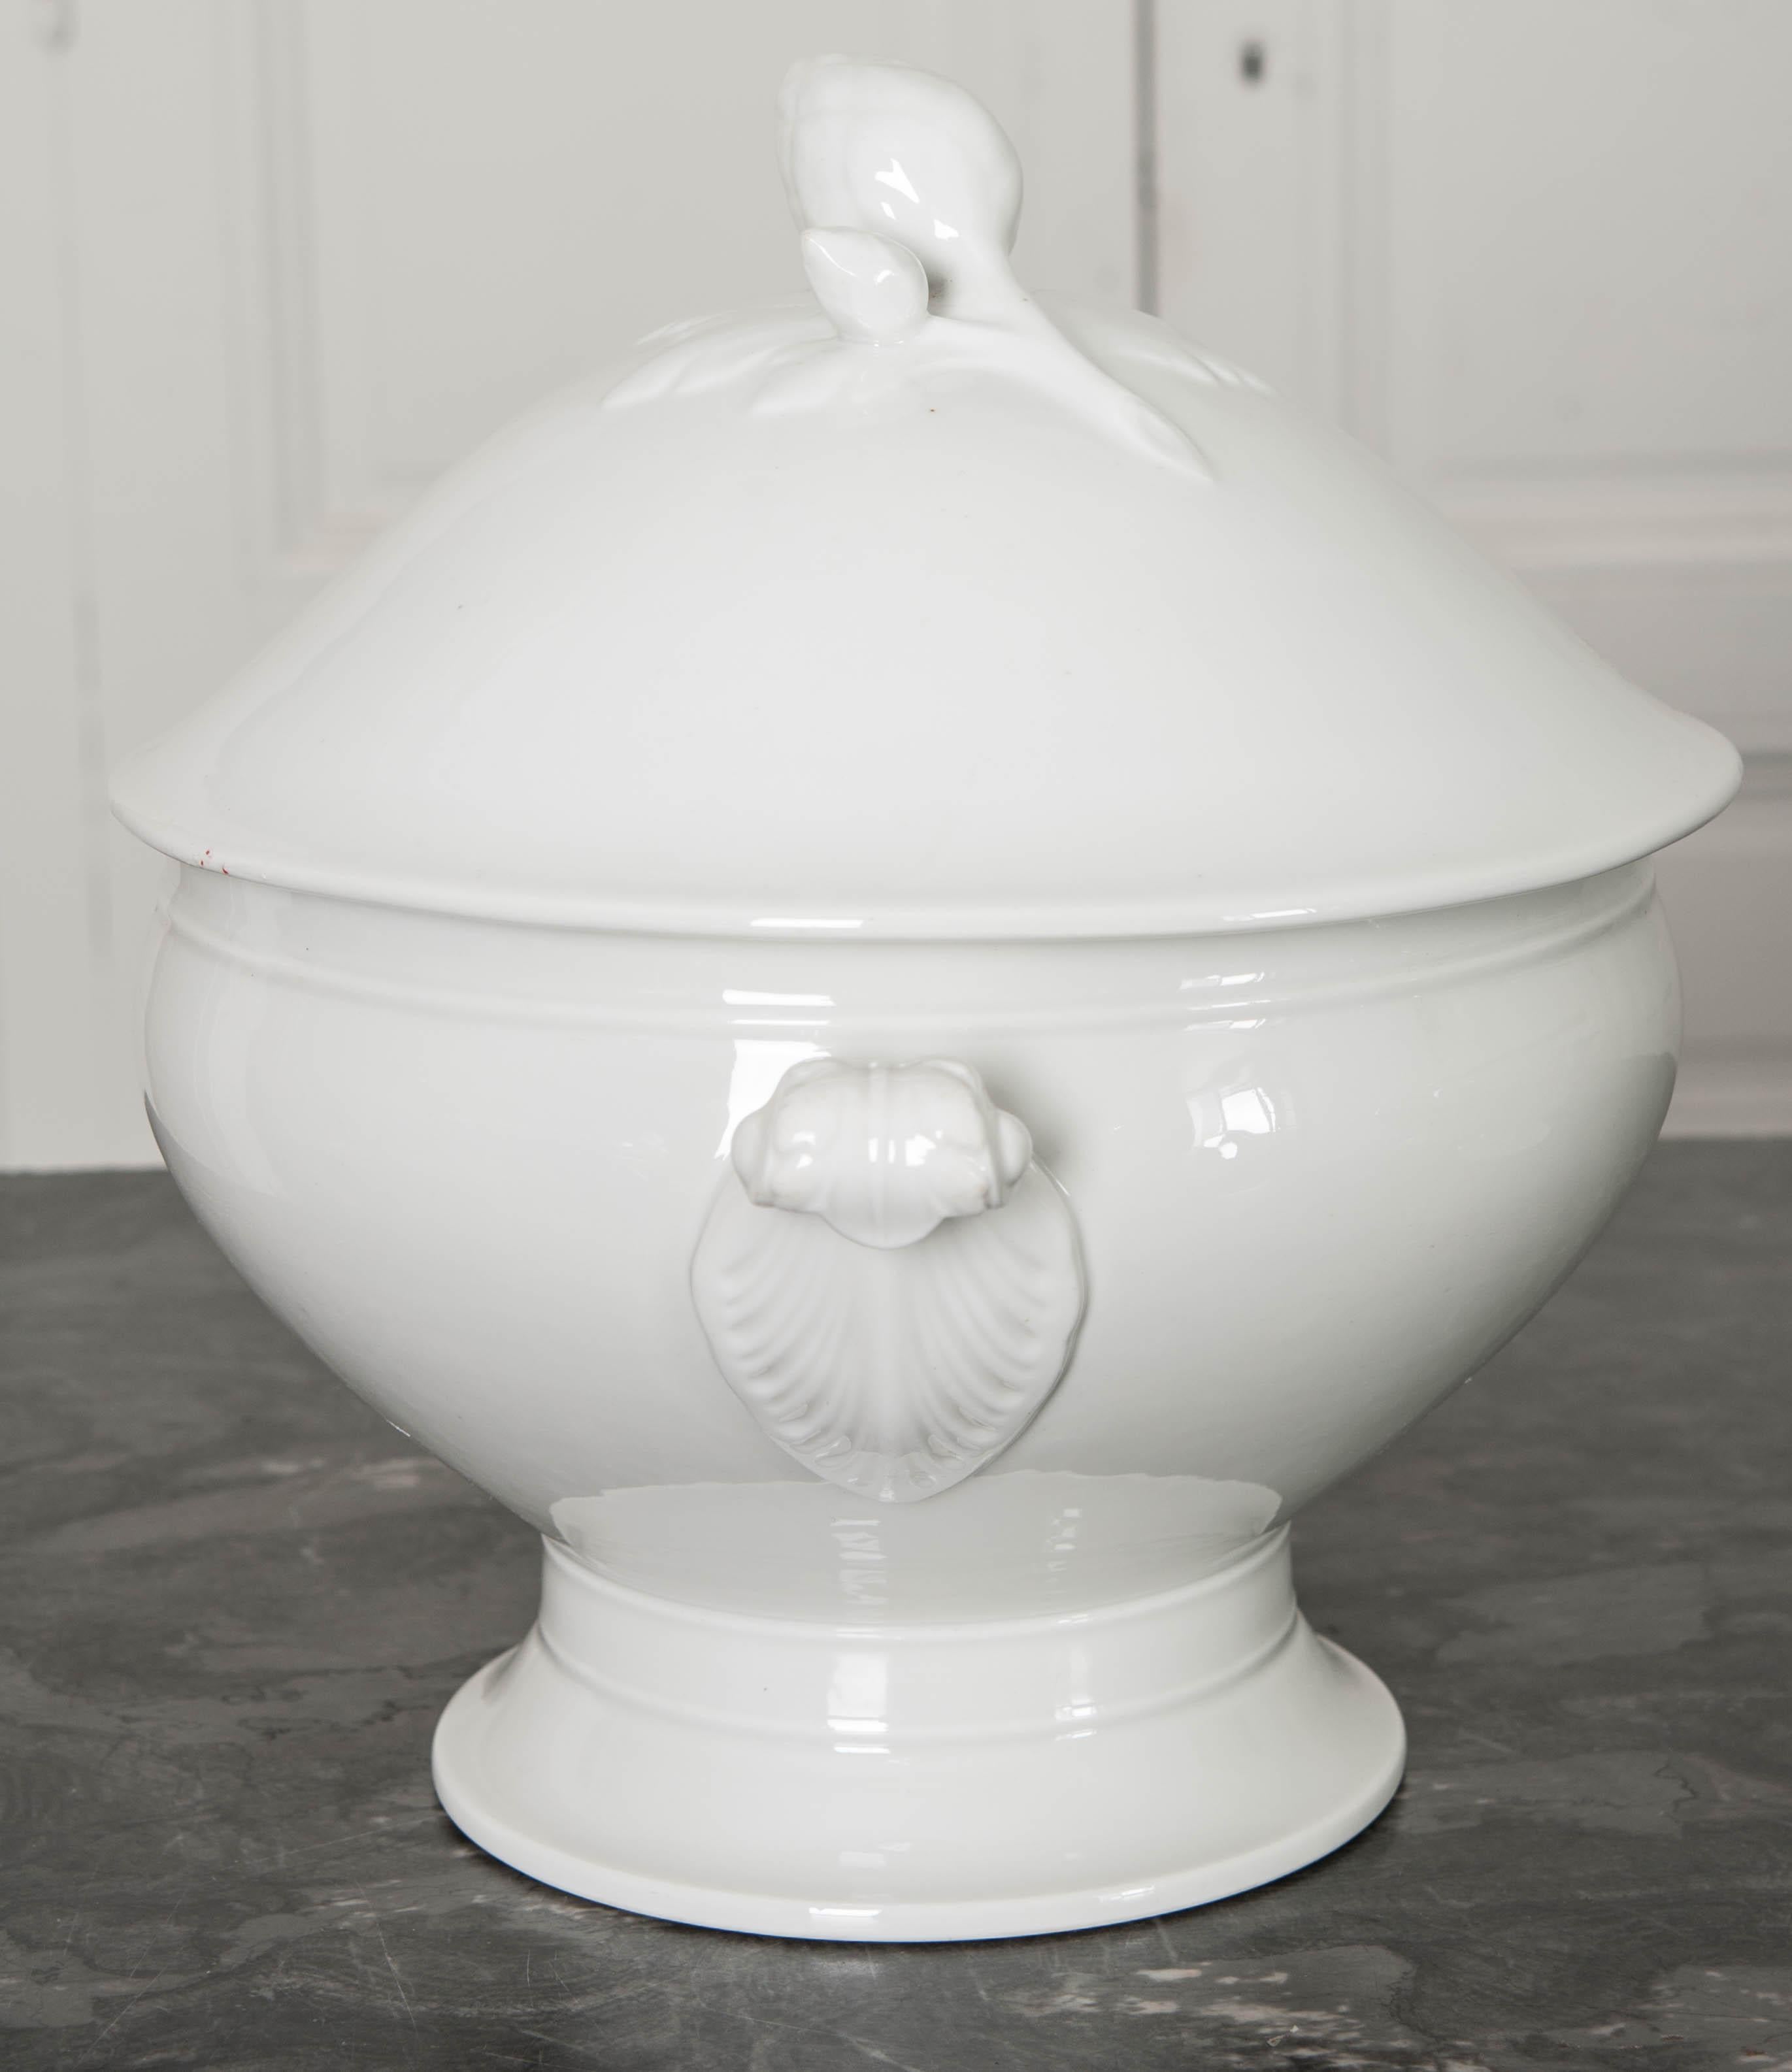 A gorgeous early 20th century white ironstone tureen, with fitted lid, from France. The stylish lid features a handle that is made in the form of a budding flower. The brilliant white finish is clean and unblemished, perfect for serving soups,